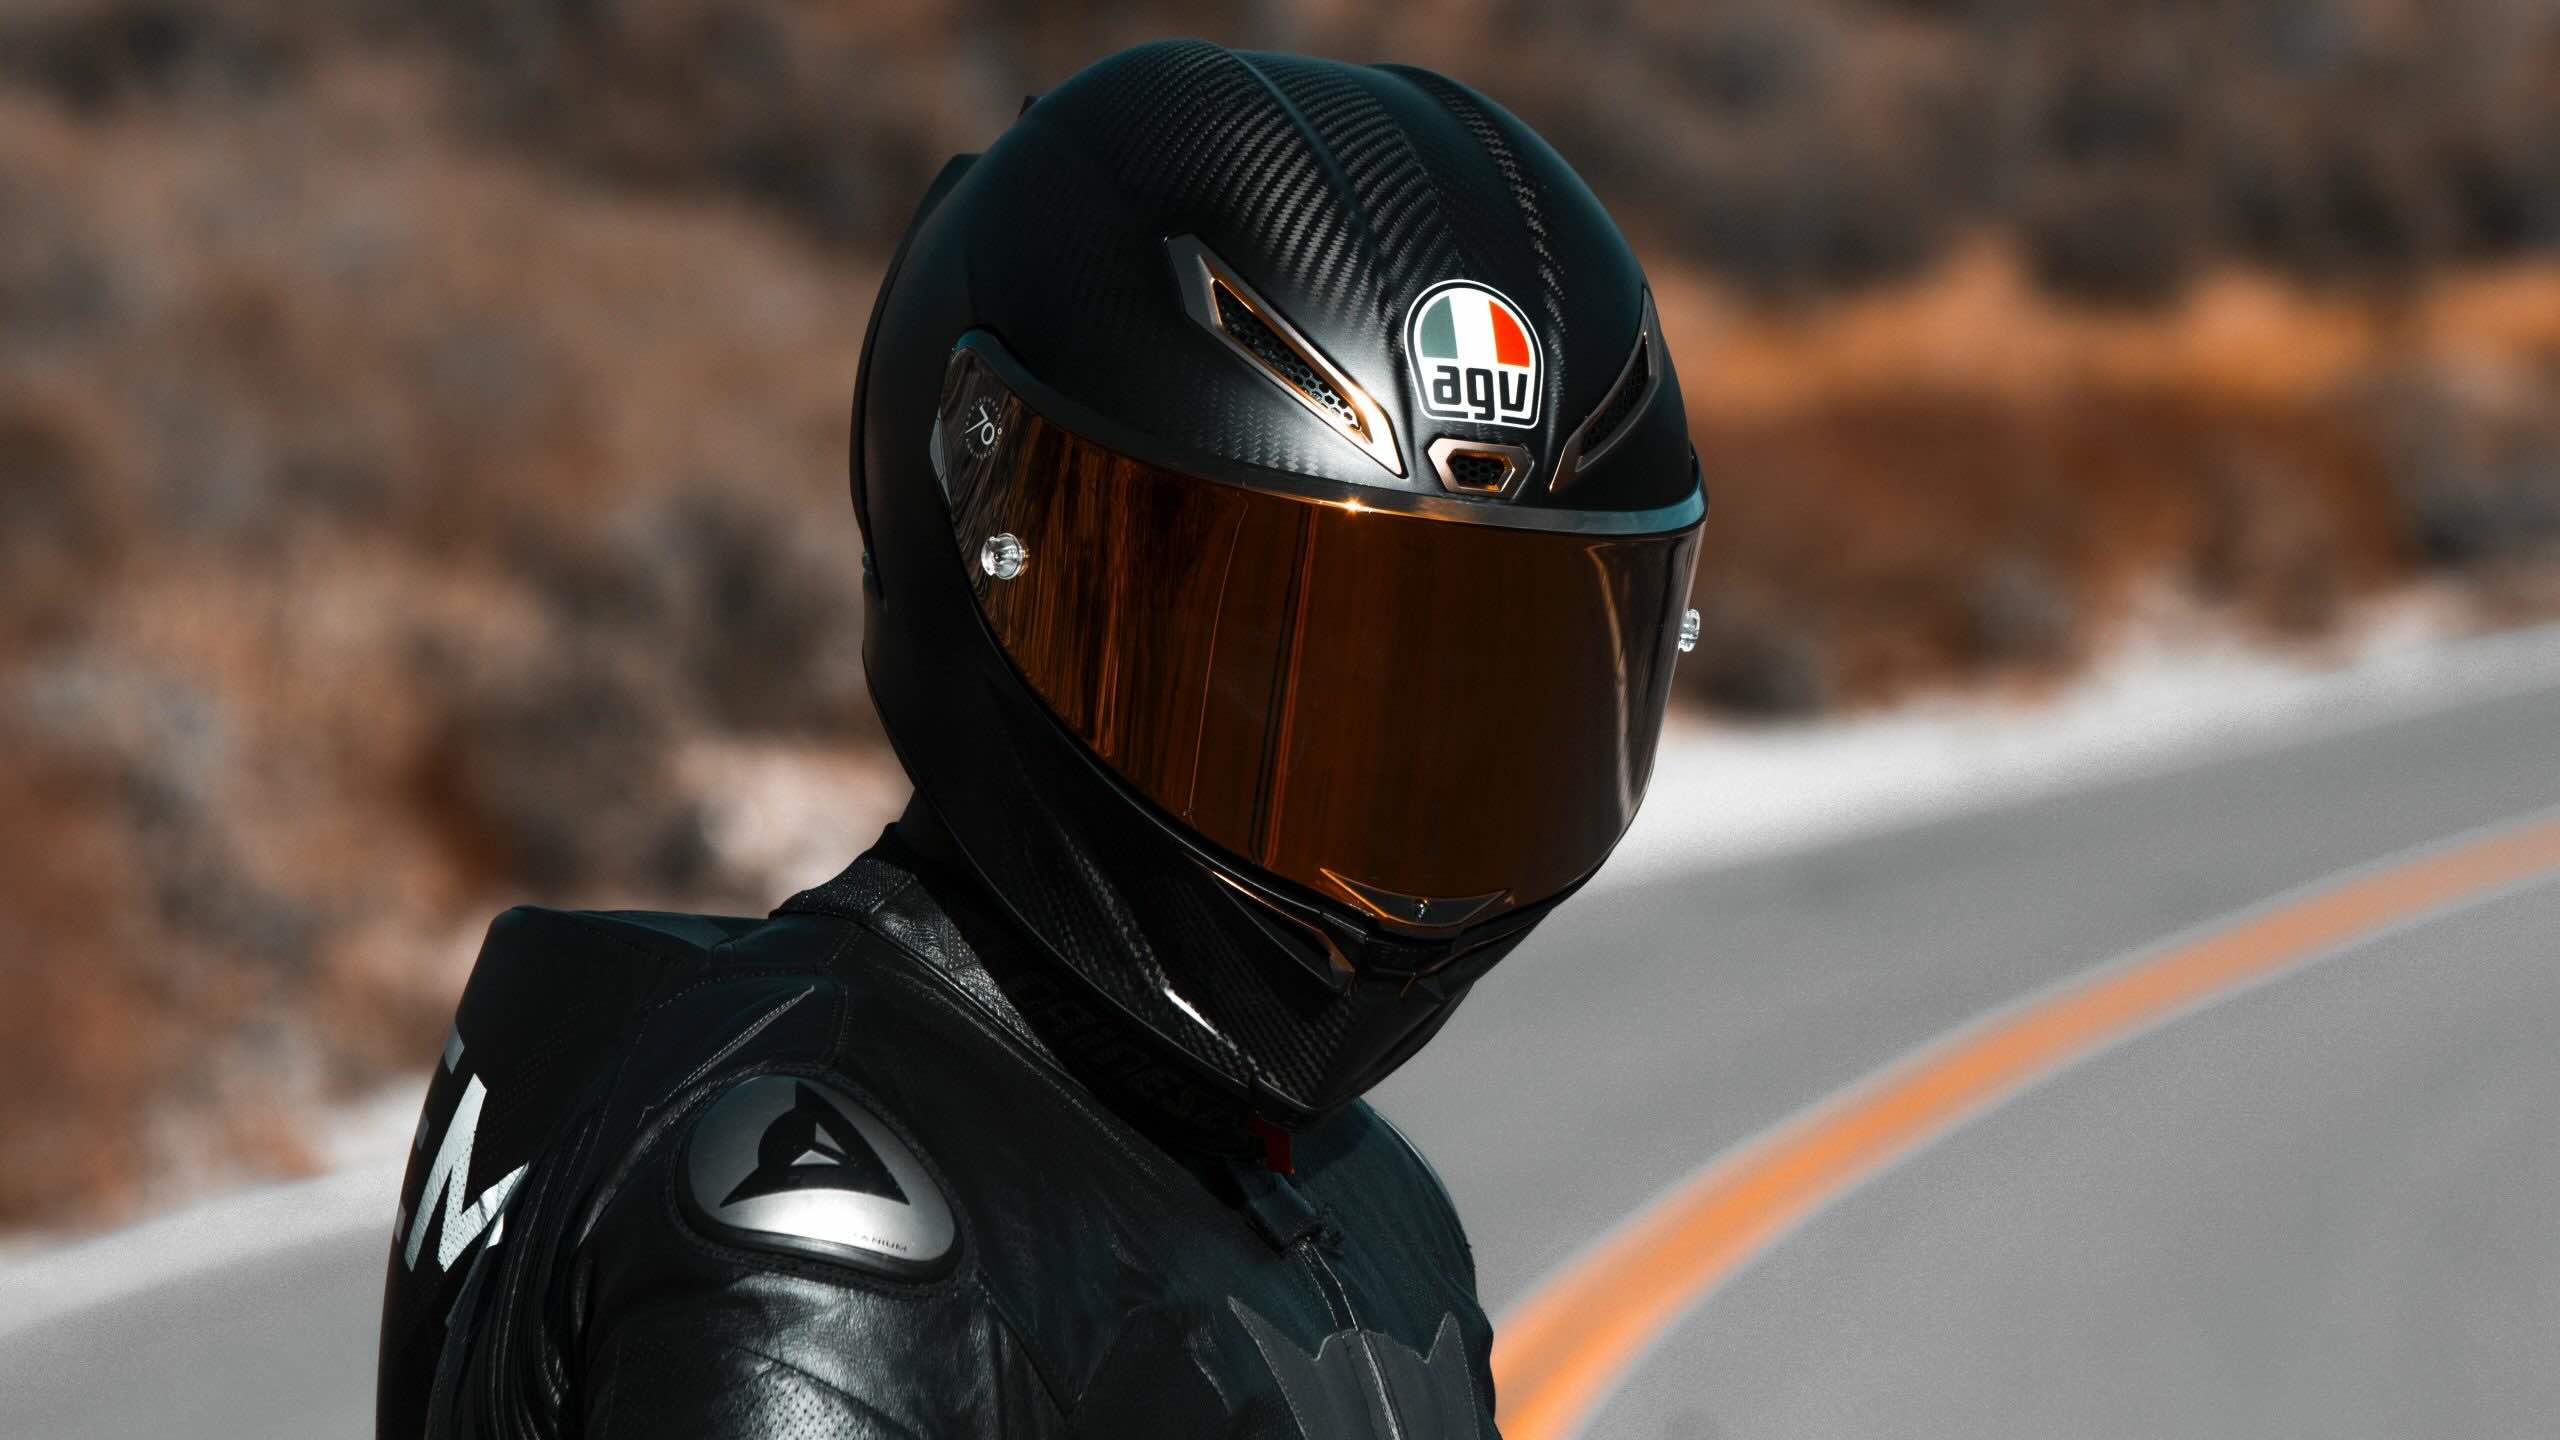 Motorcycle Helmet Review: Find the Perfect Fit for Safety